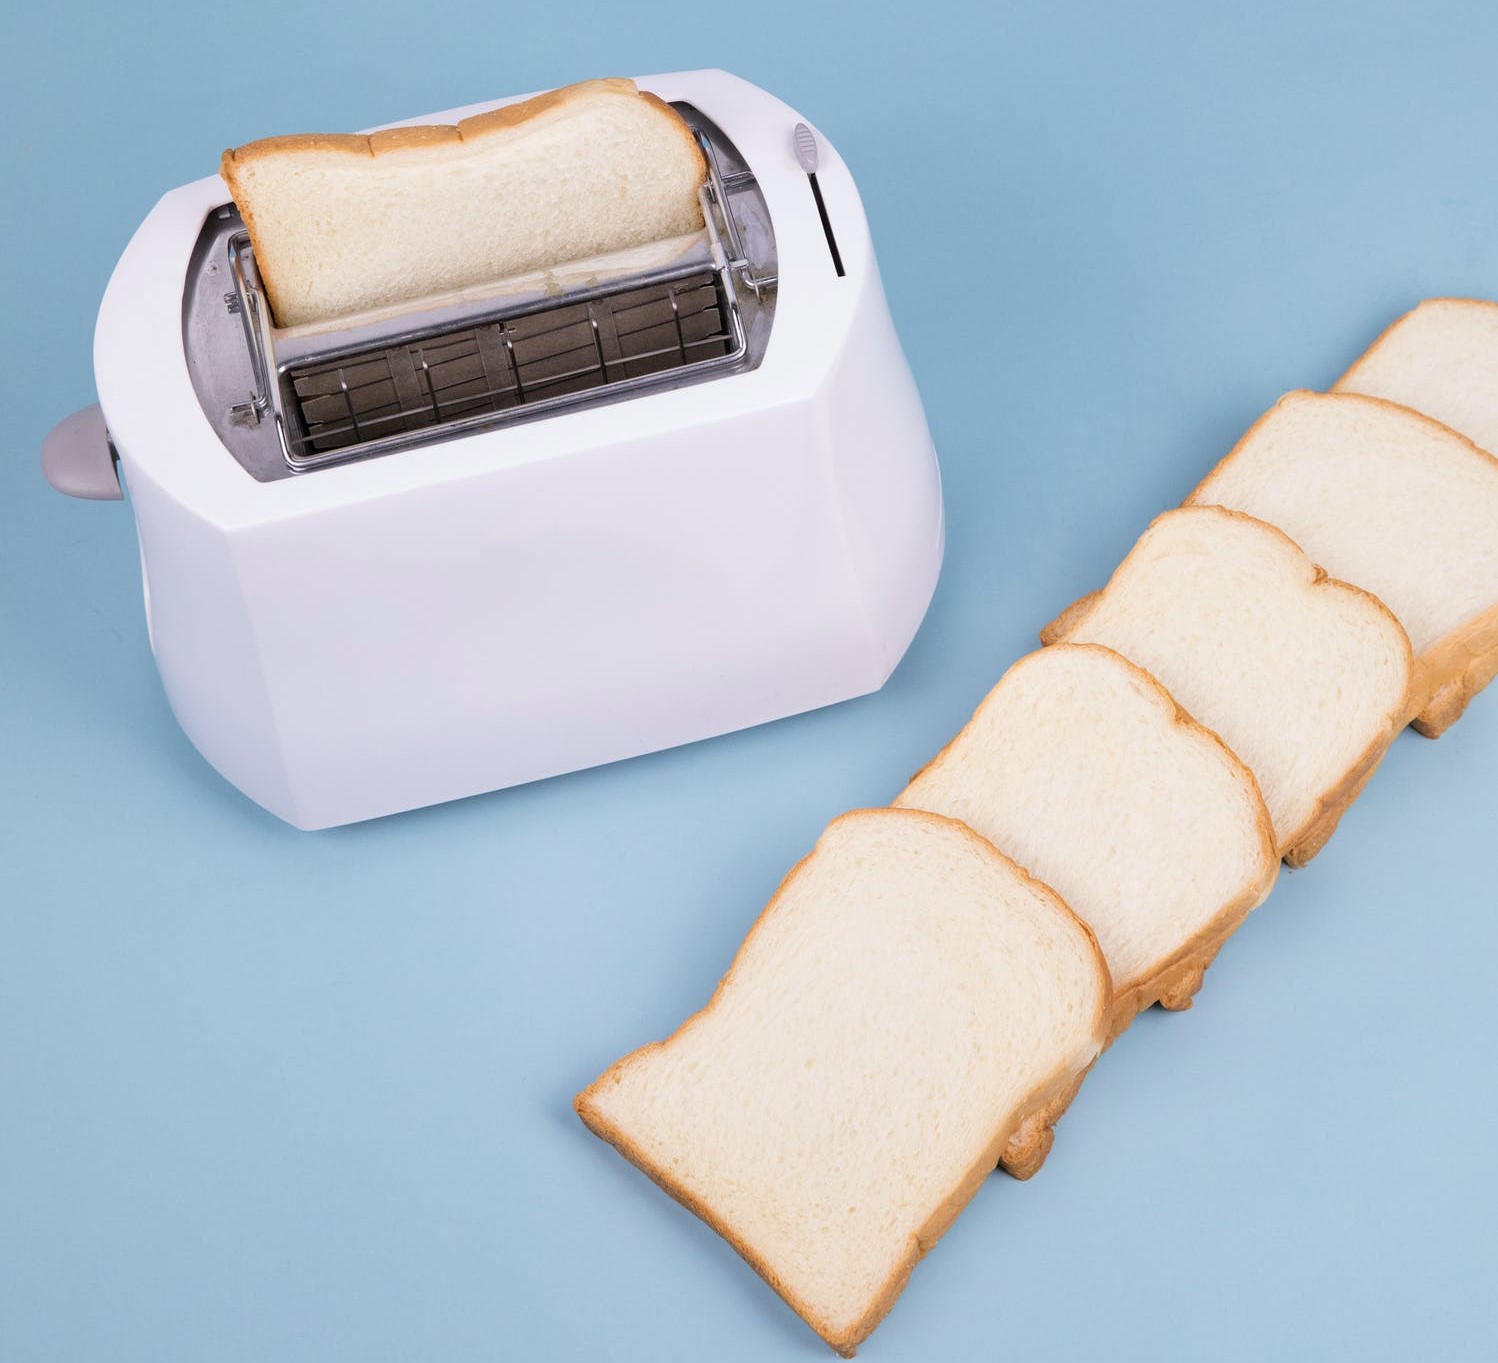 Best toasters To Buy In 2022 (Top 5 Picked & Reviews)